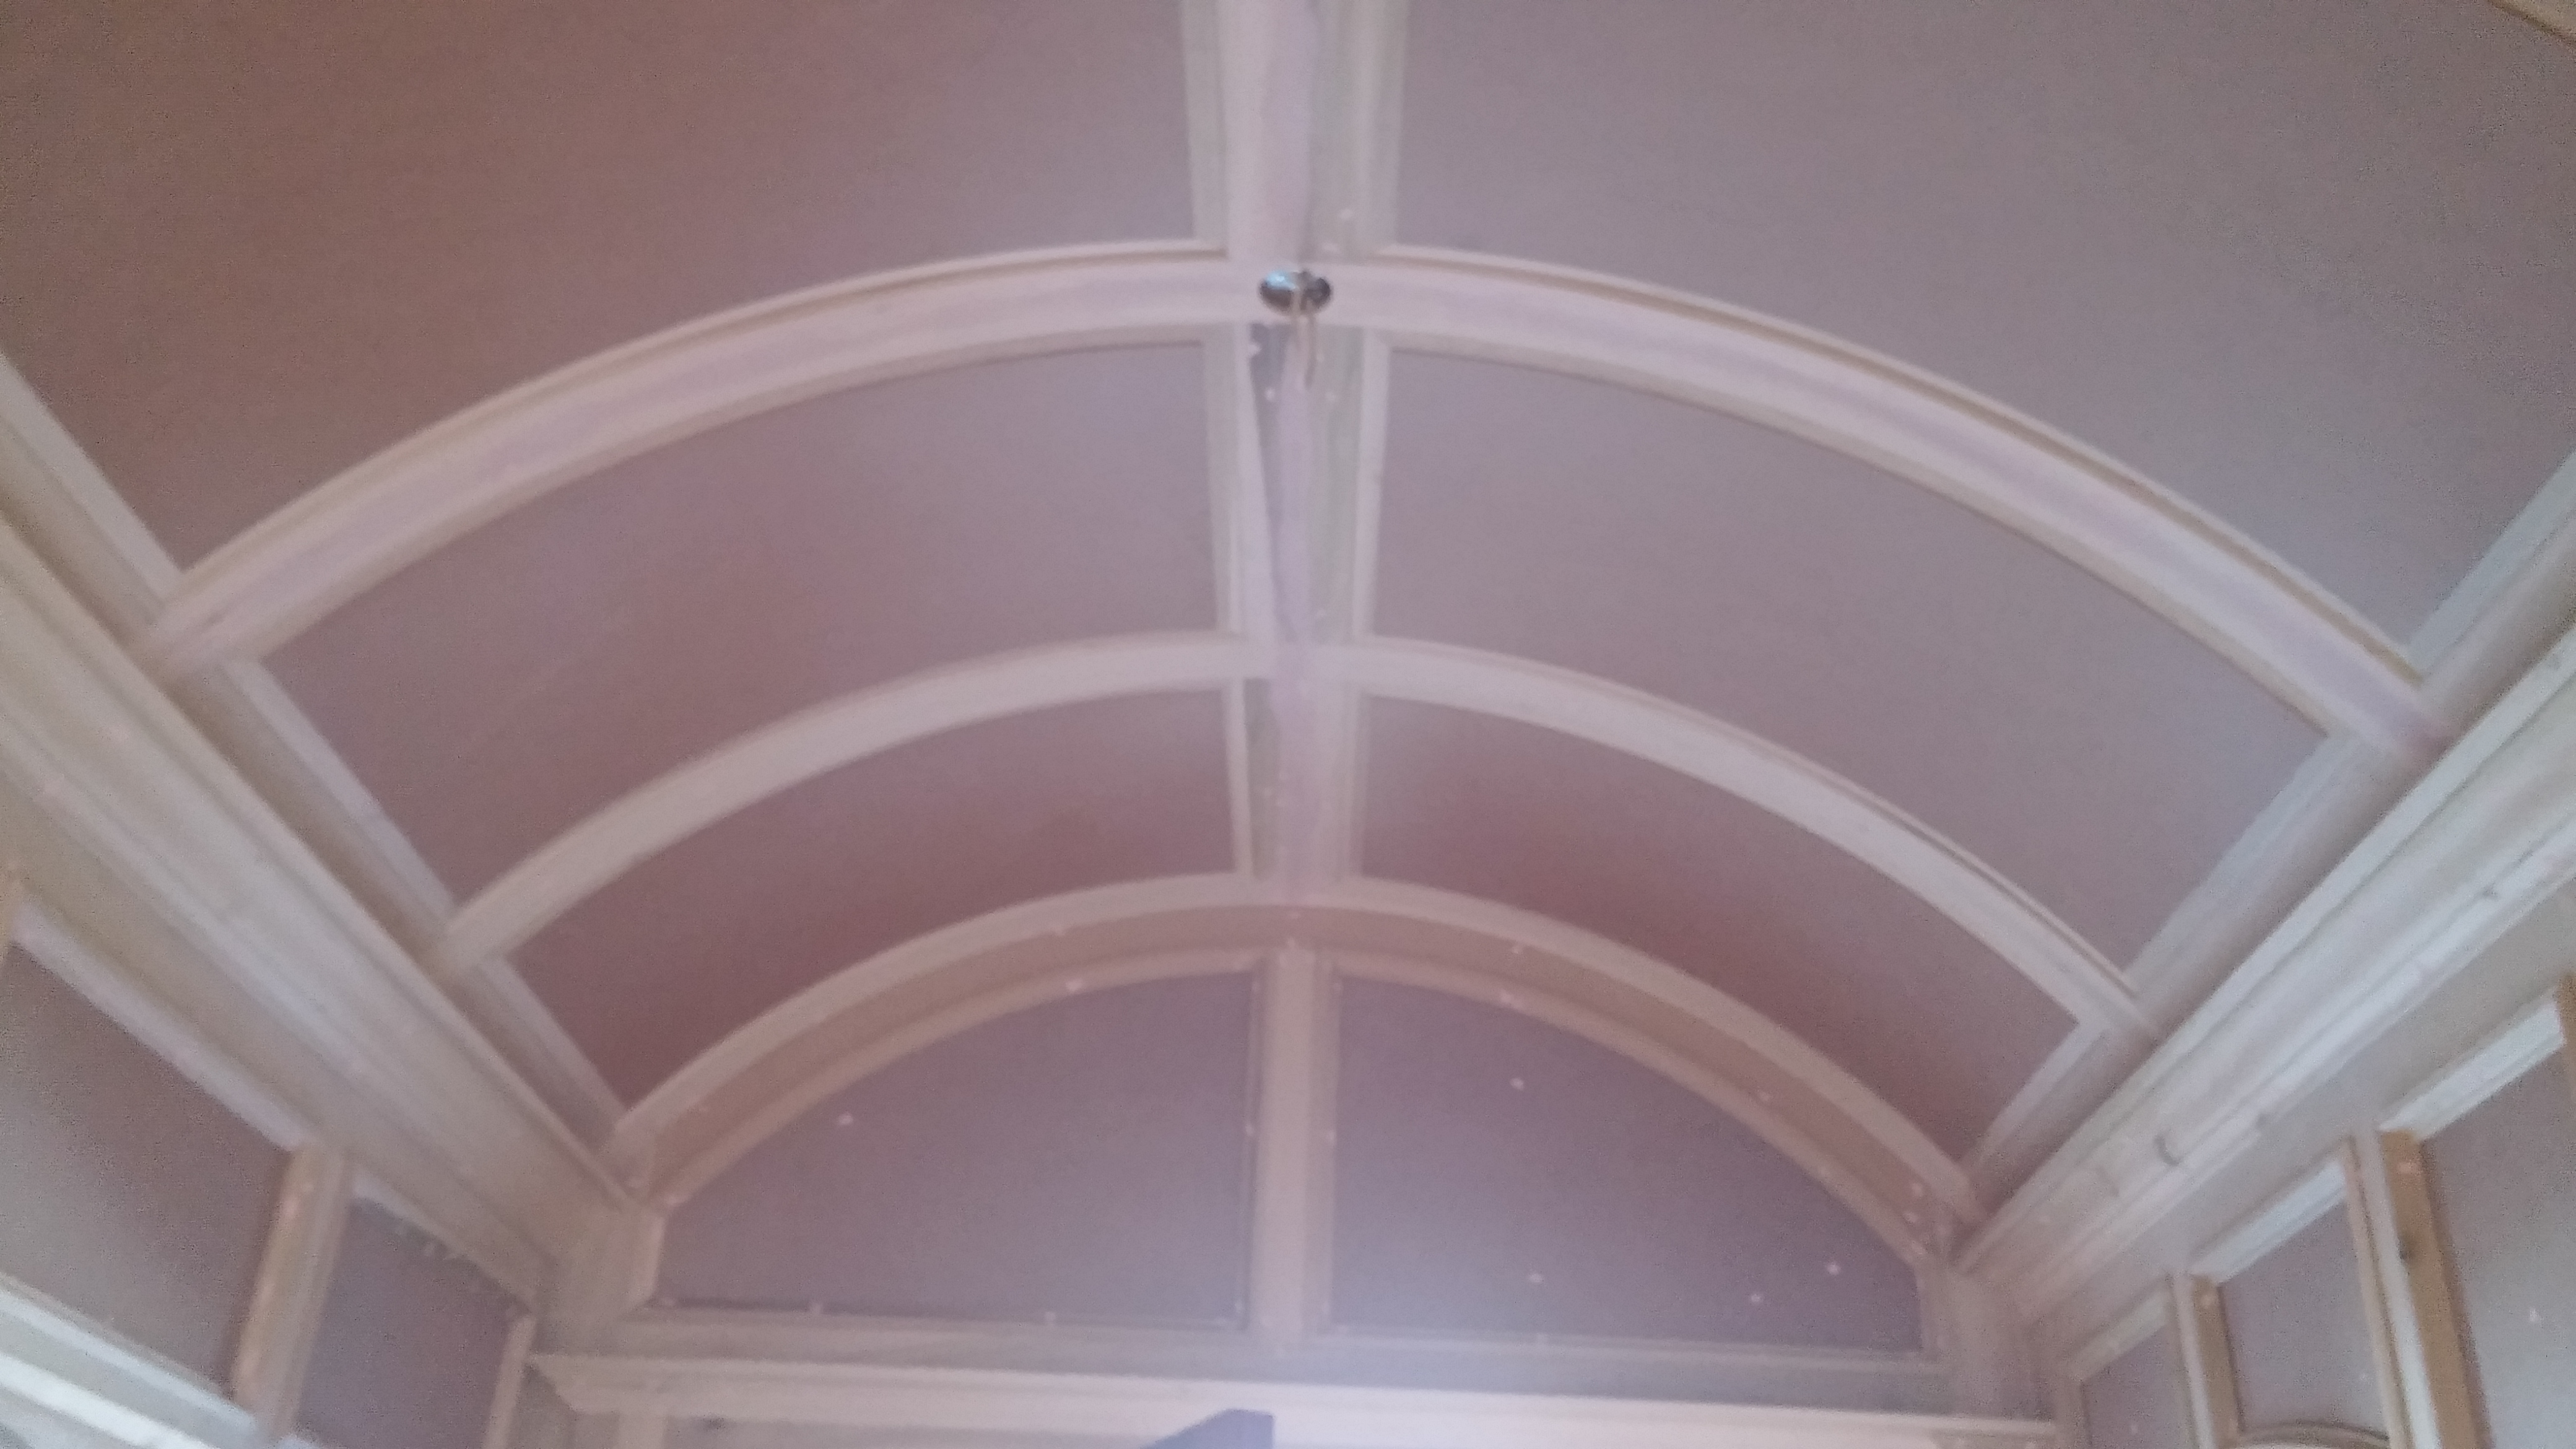 Arch ceiling with MDF panels and Poplar trim & crown